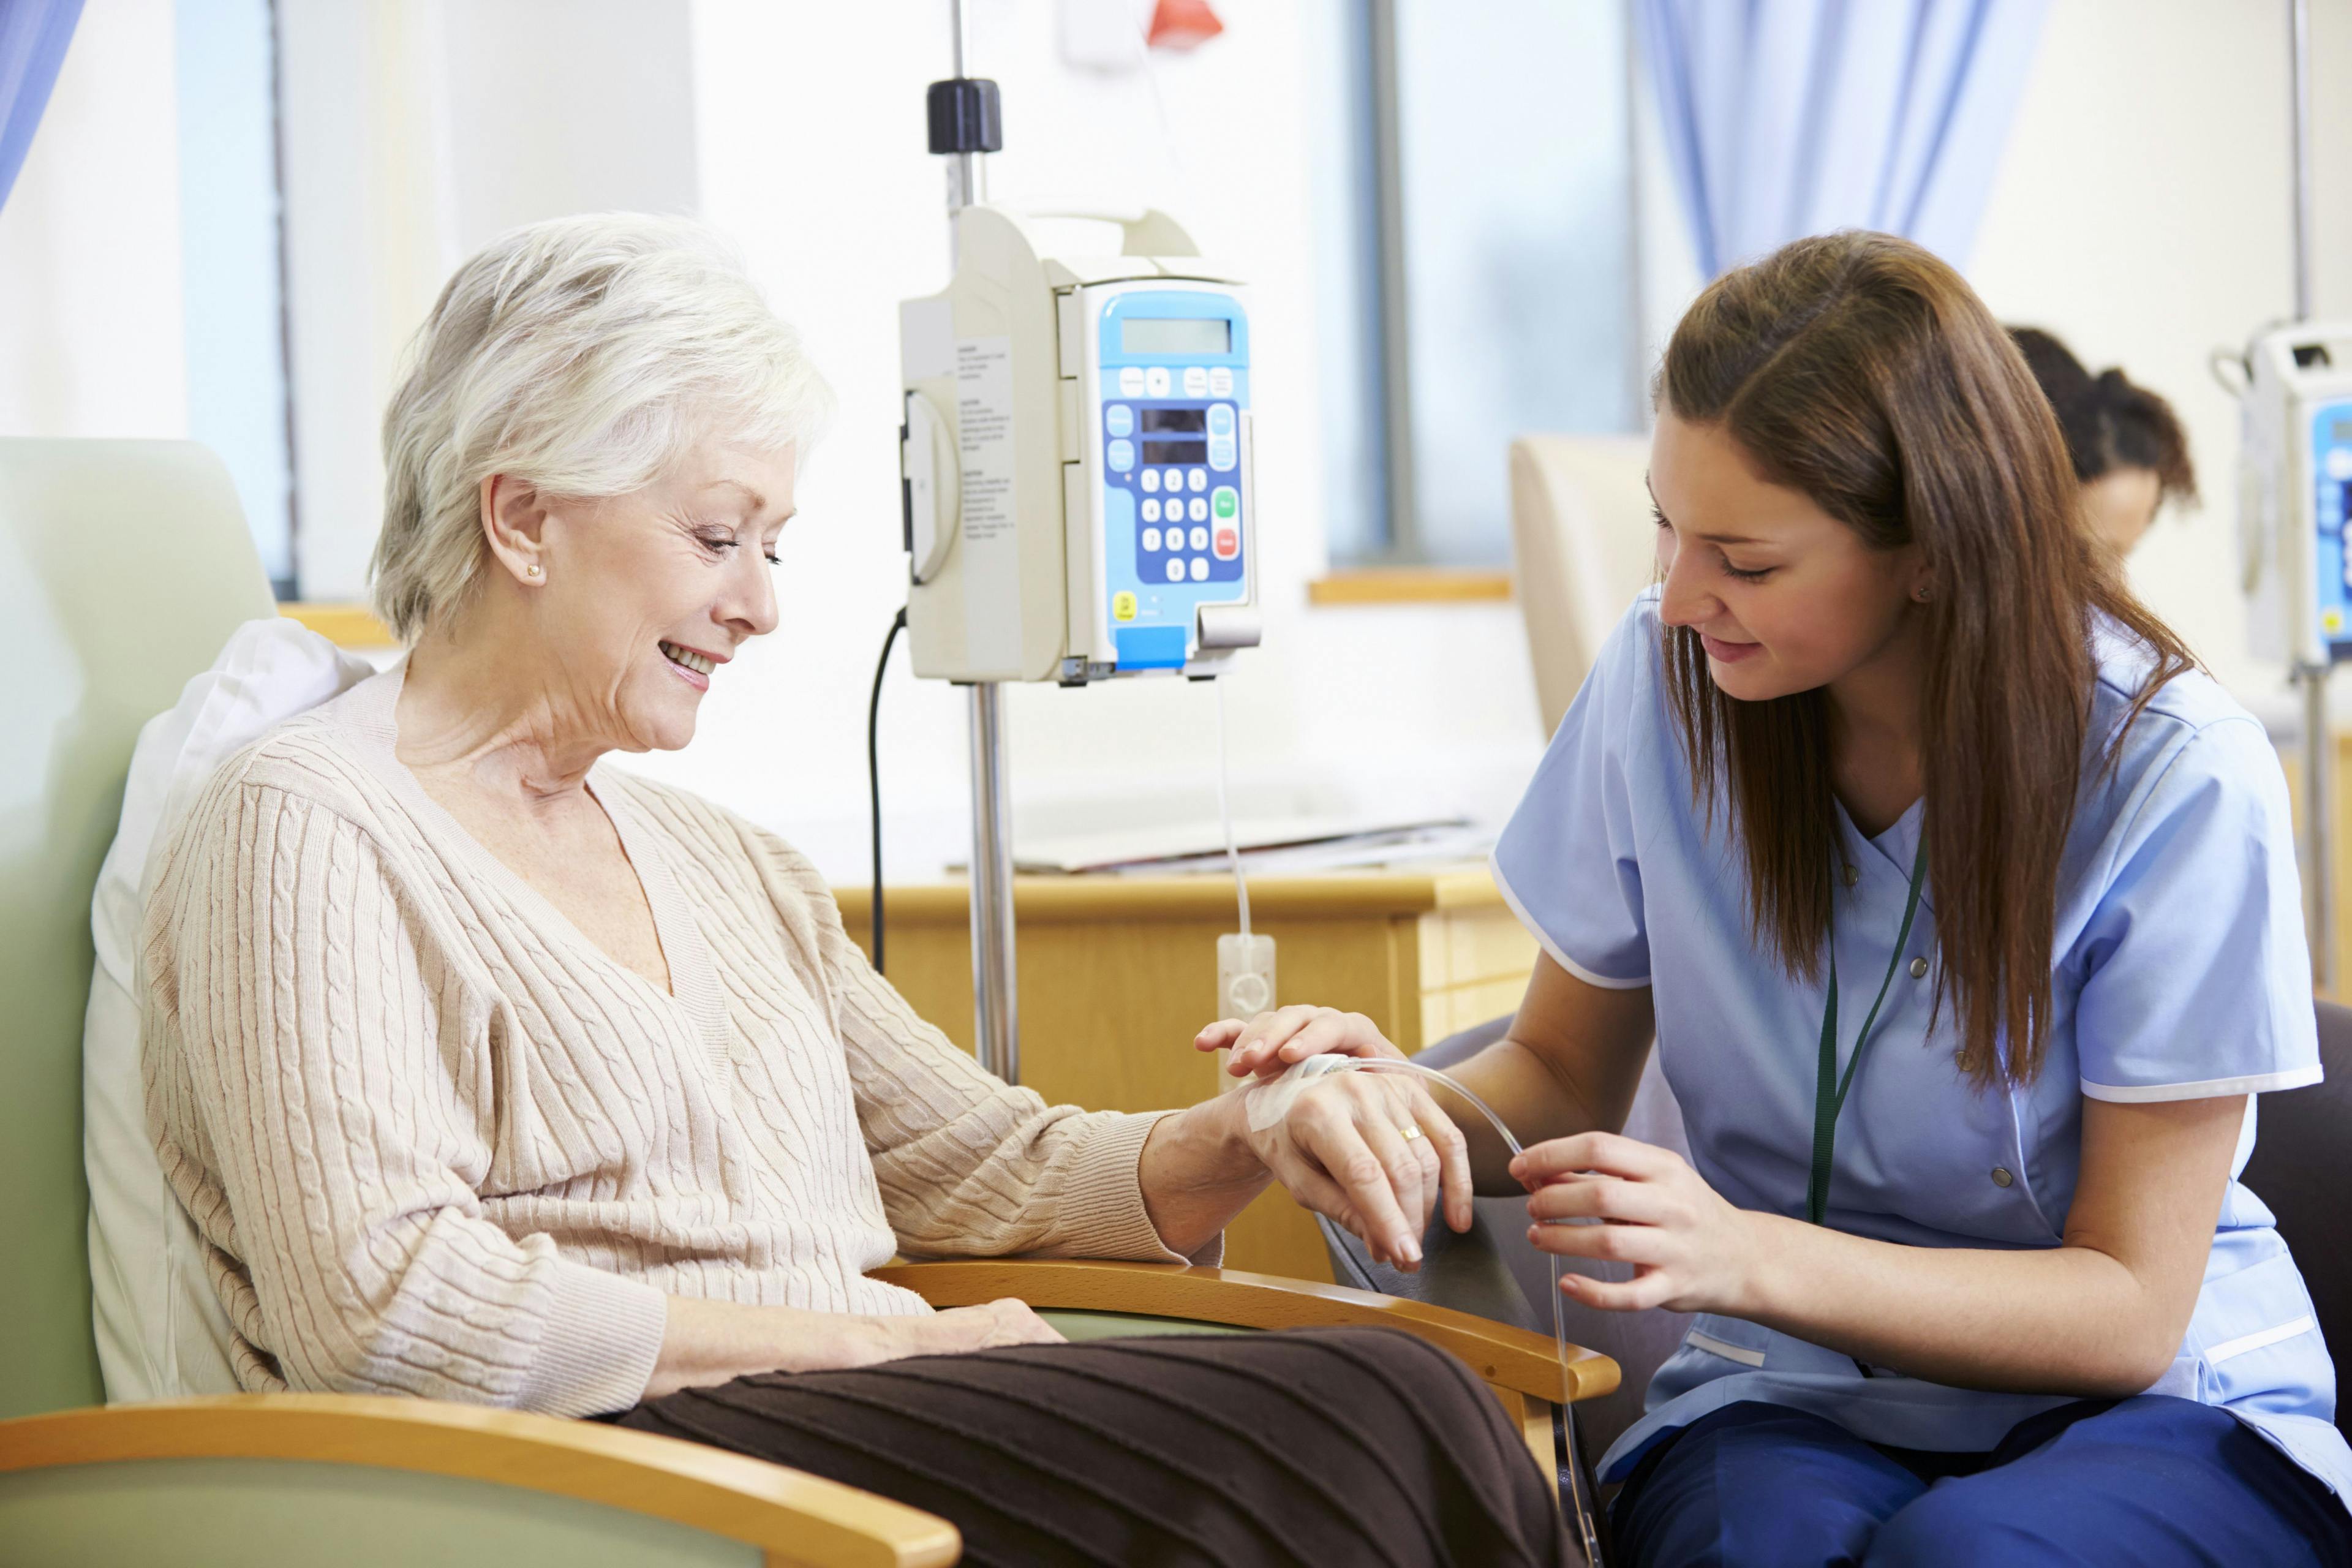 Nurses Can Build Strategies to Facilitate More Meaningful Discussions With Patients and Caregivers